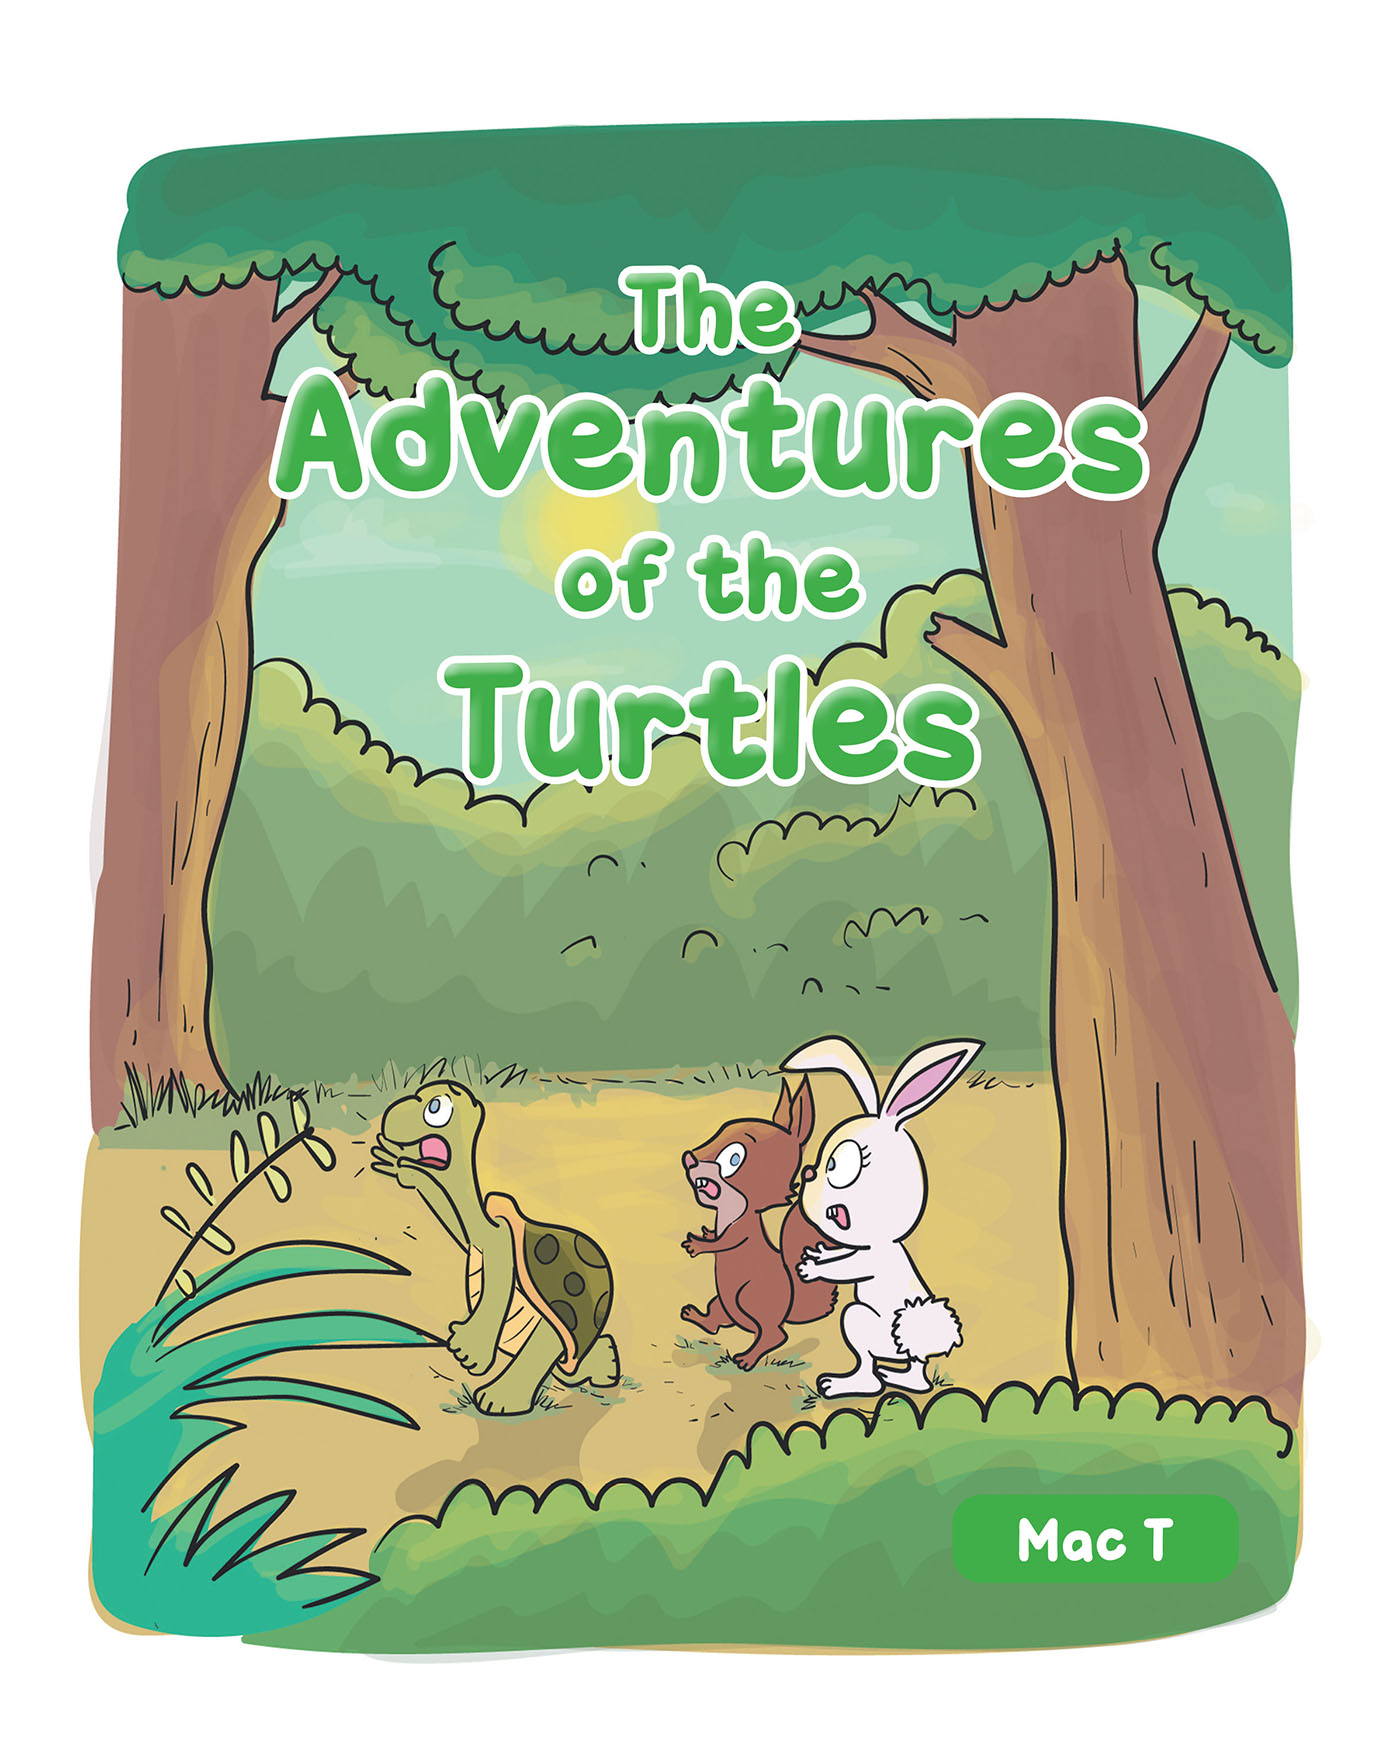 Author Mac T’s New Book, "The Adventures of the Turtles," Introduces a Family of Turtles That Grow Closer and Learn More About Each Other During an Exciting Adventure